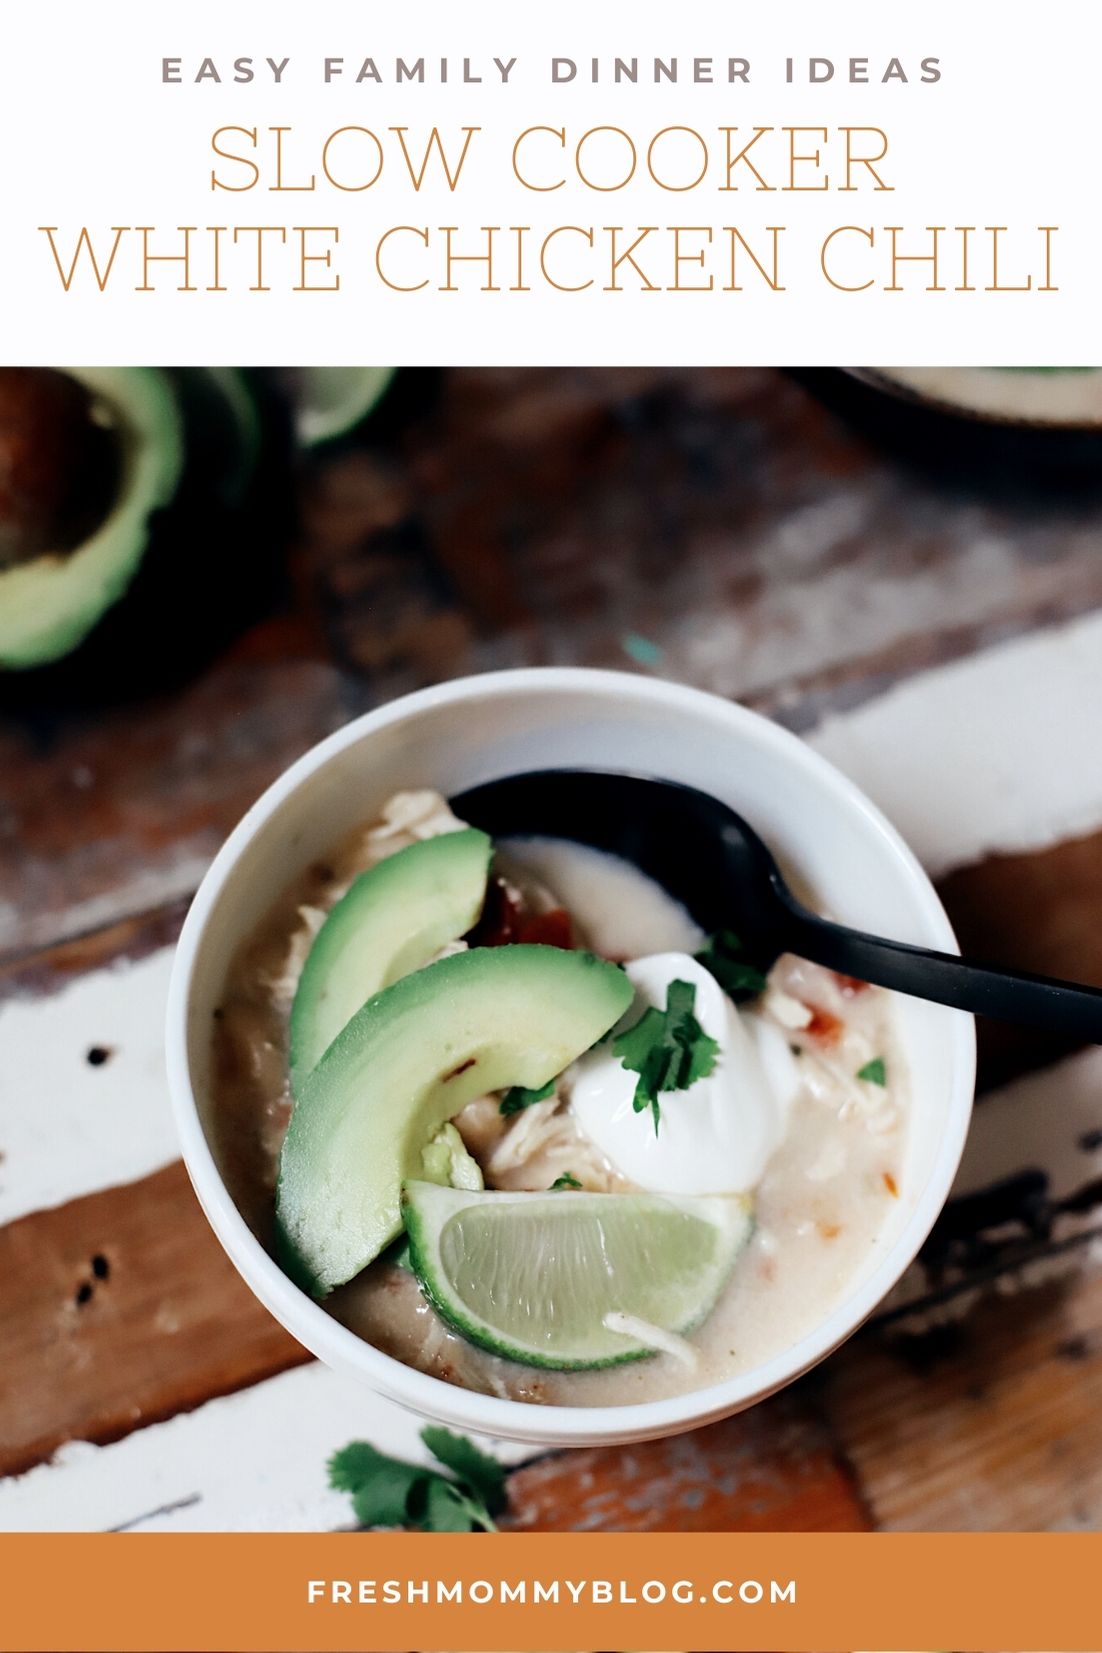 Easy slow cooker white chicken chili. Slow cooker white chicken chili is a creamy, slightly sweet, and mildly spicy. Best of all, it is so easy to make!